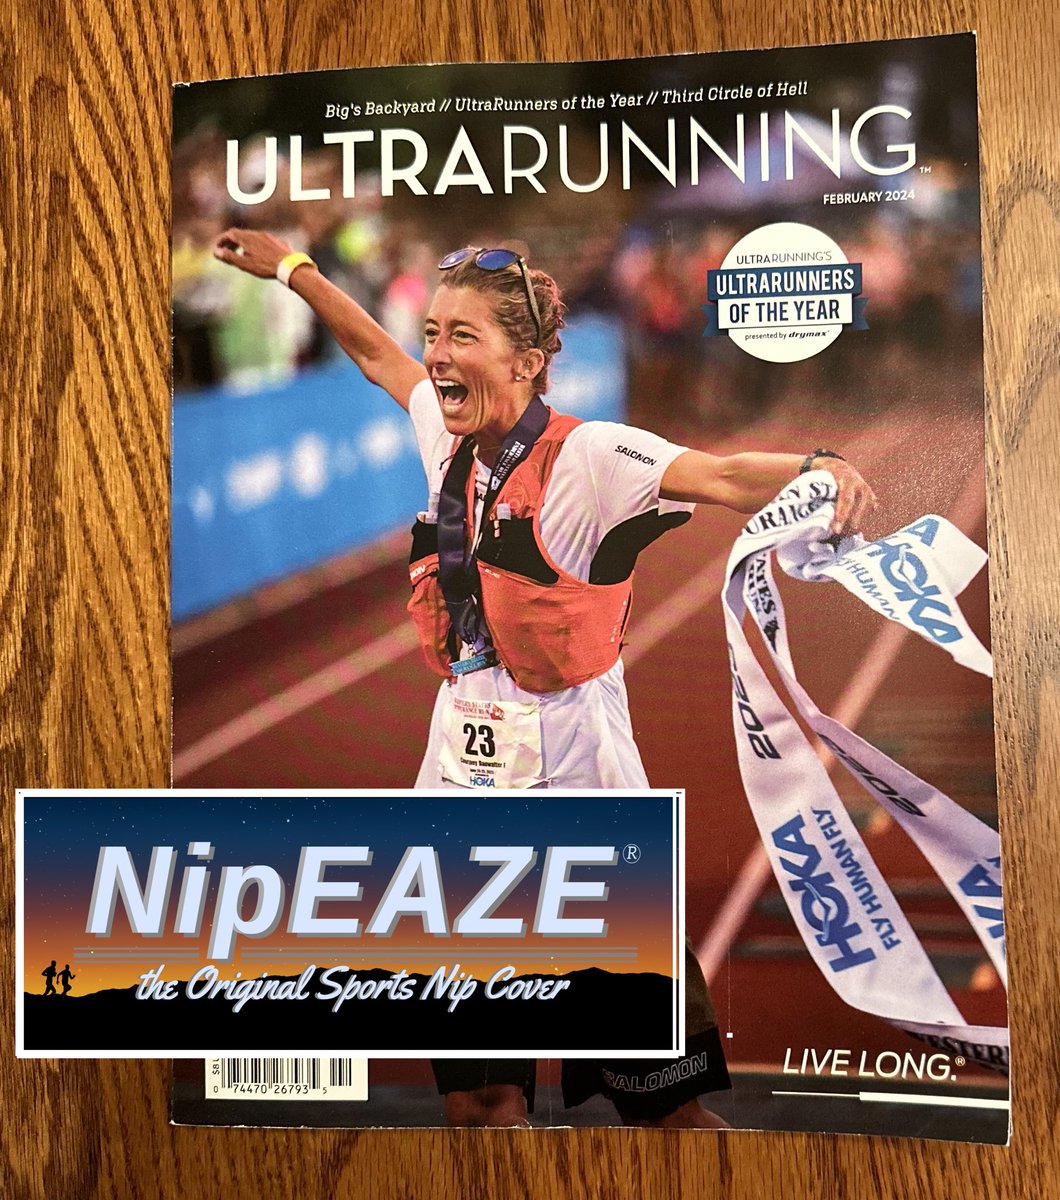 Congratulations to the UltraRunners of the year! And Thank You, UltraRunning Magazine, for continuing to support NipEaze! @NipEAZE #ultrarunner #ultrarunning #ultrarunningmagazine #nipeaze #livelong #running #50km #marathon #training #endurance #extremesports